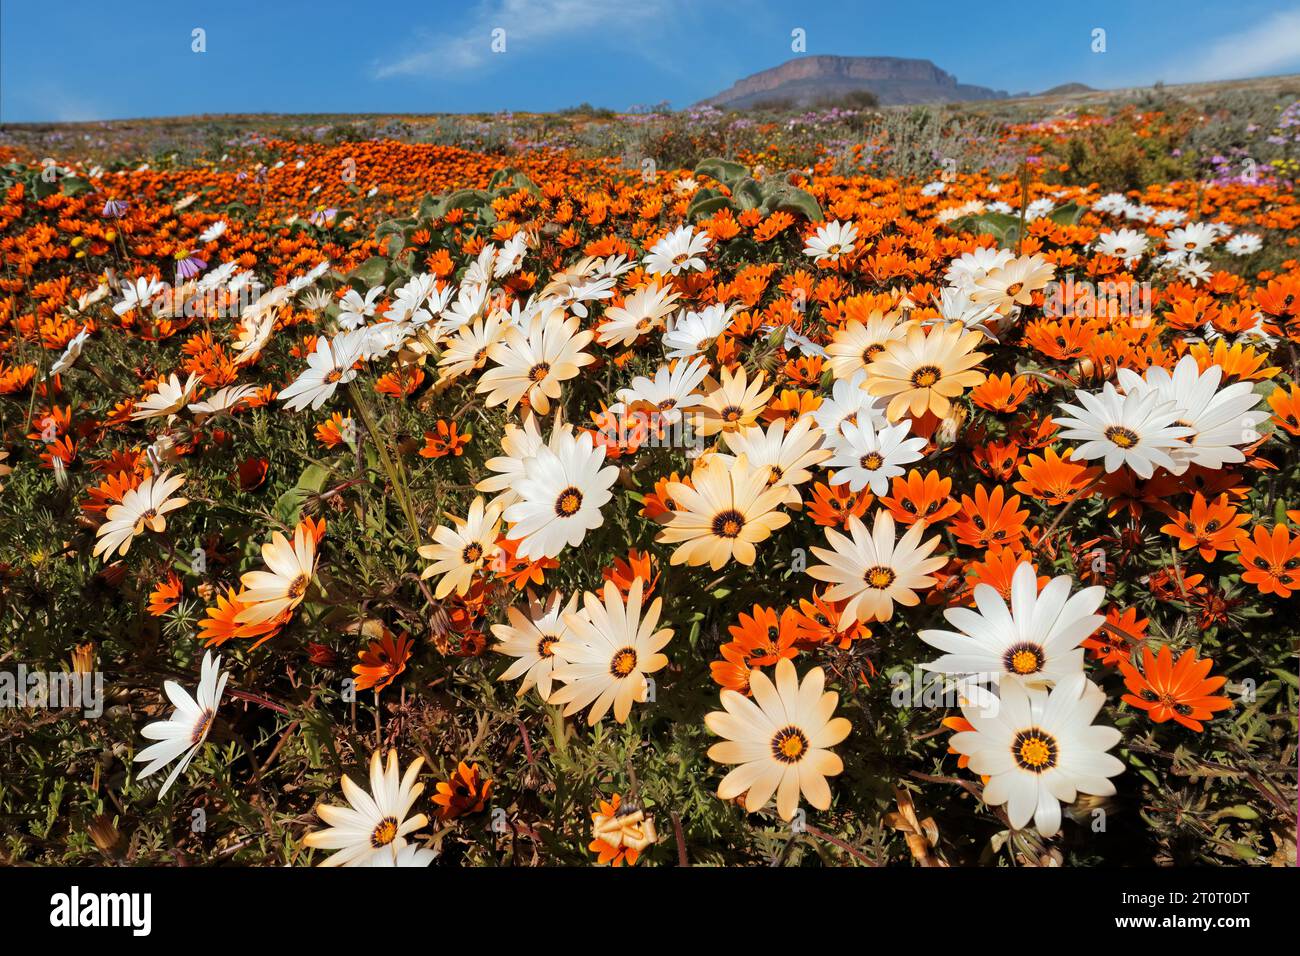 Colorful spring blooming wildflowers, Namaqualand, Northern Cape, South Africa Stock Photo